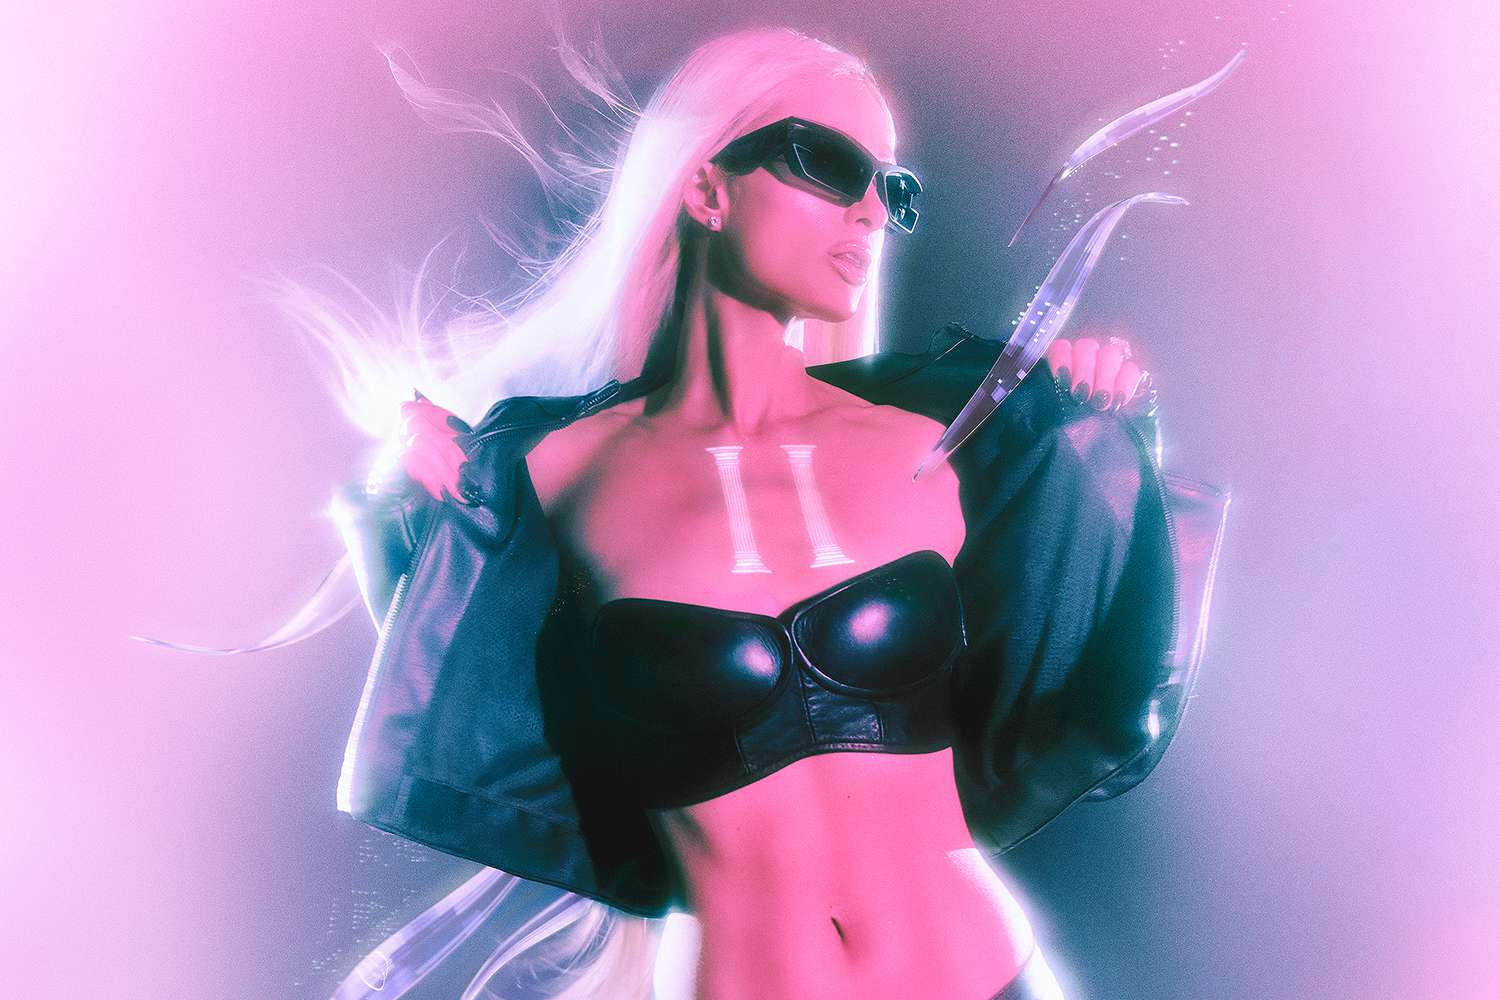 Paris Hilton Announces Her Second Album “Infinite Icon” Nearly 2 Decades After 'Stars Are Blind'